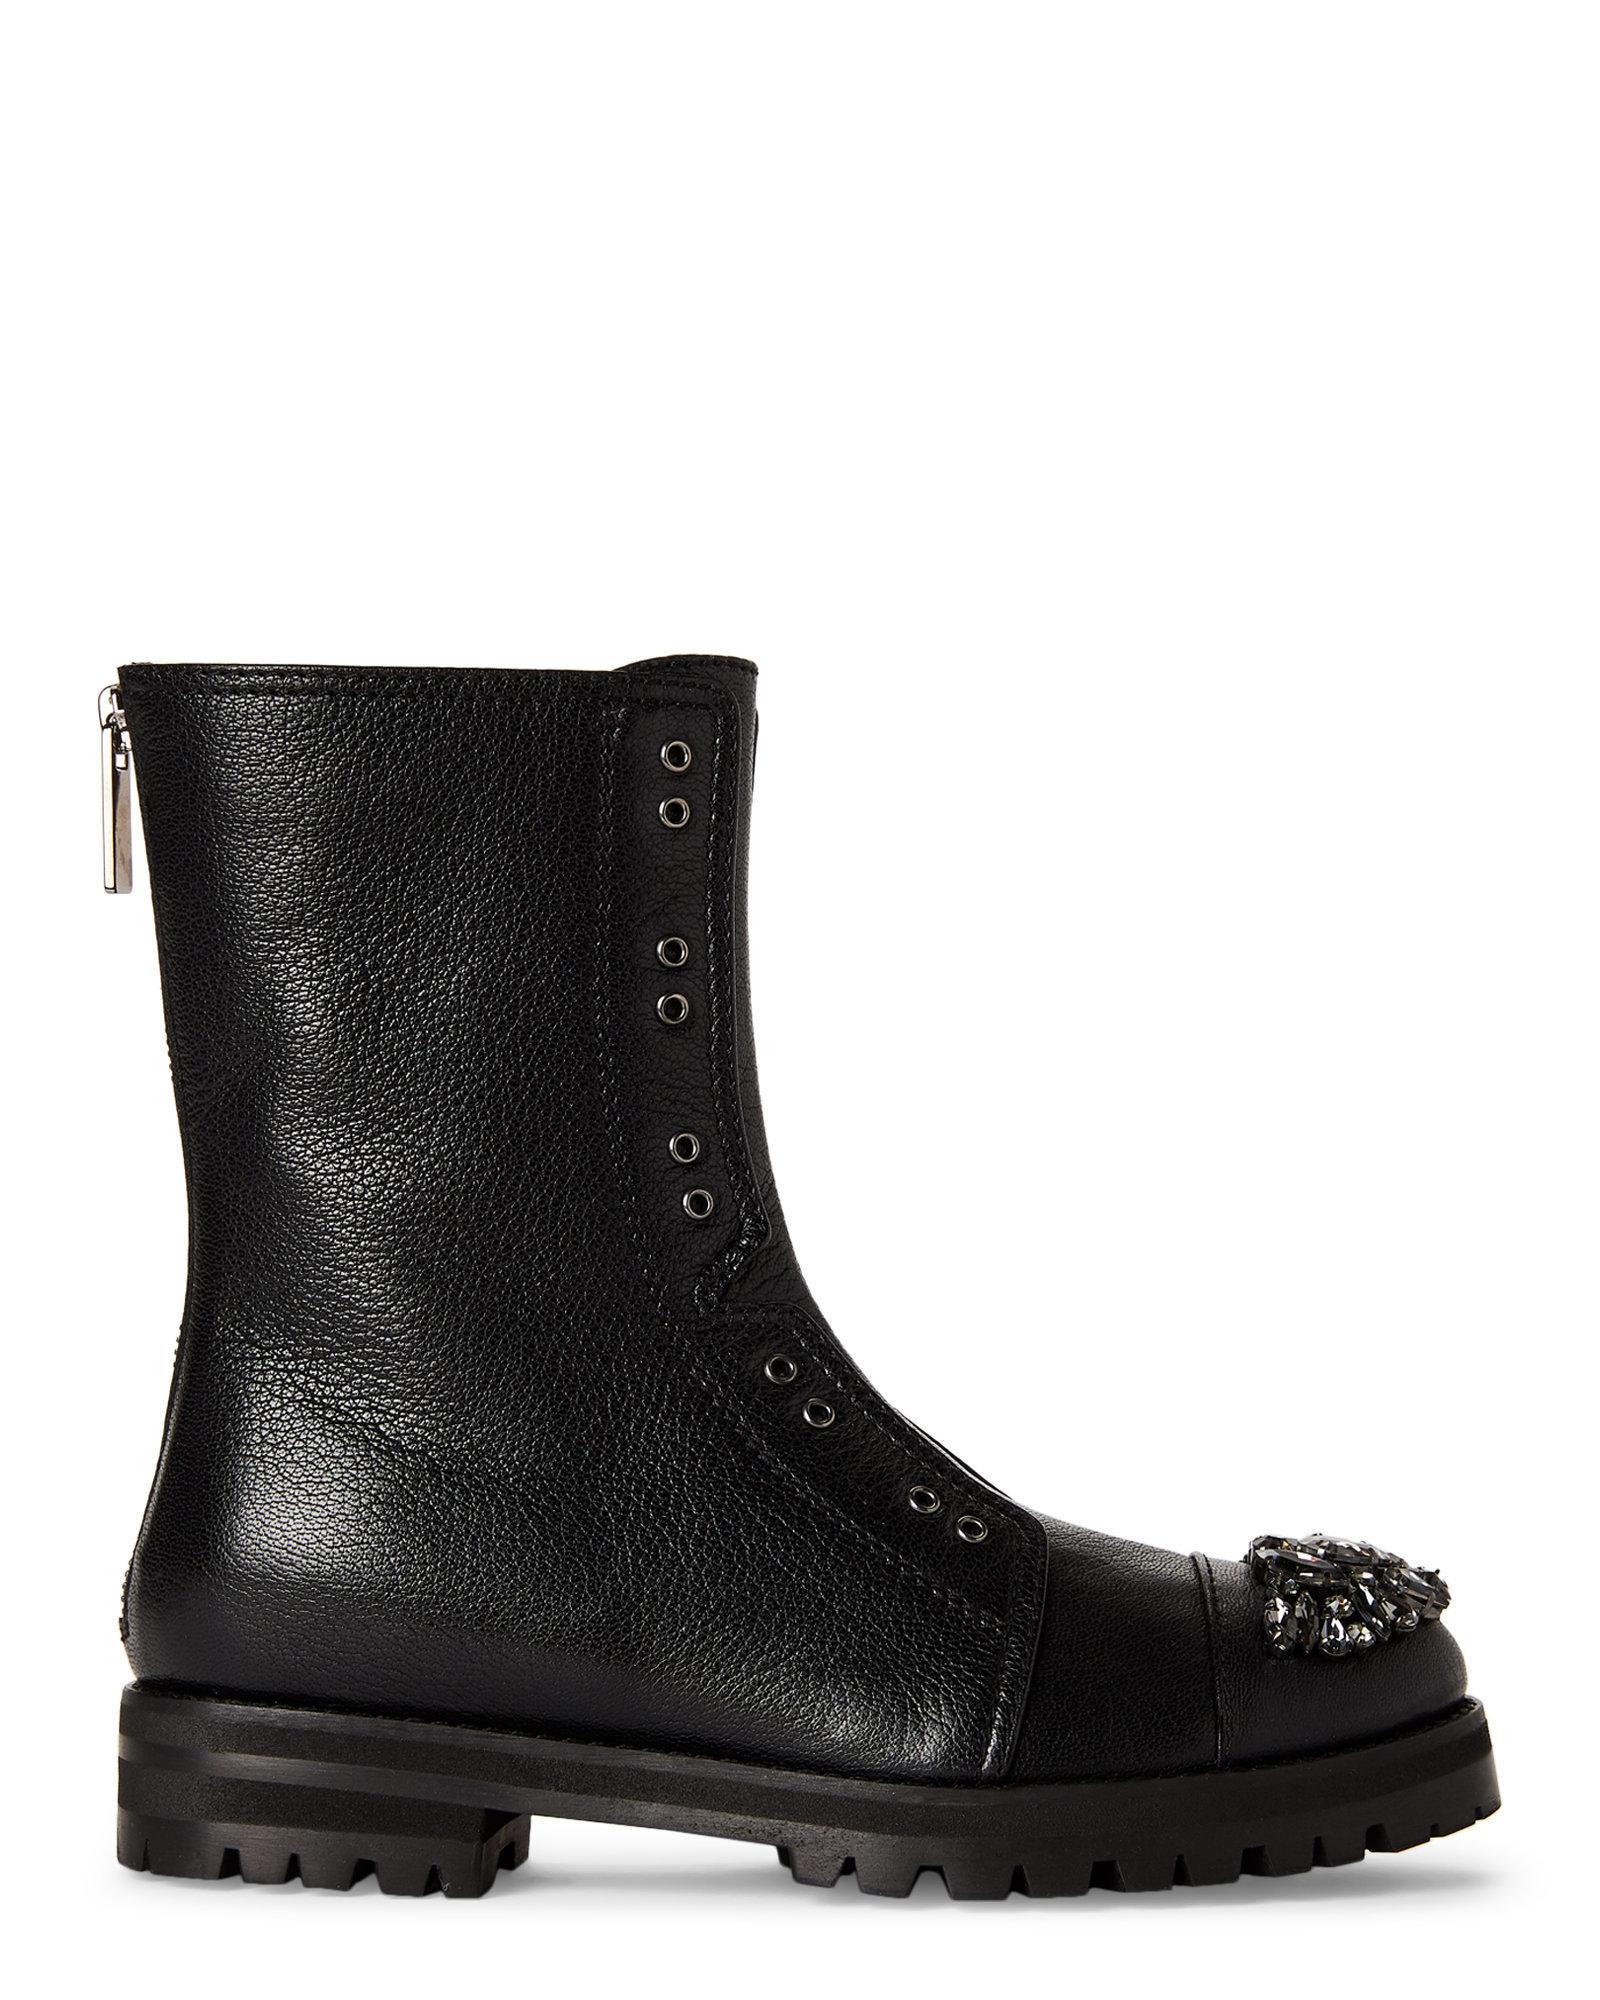 Jimmy Choo Hatcher Embellished Leather Ankle Boots in Black - Lyst